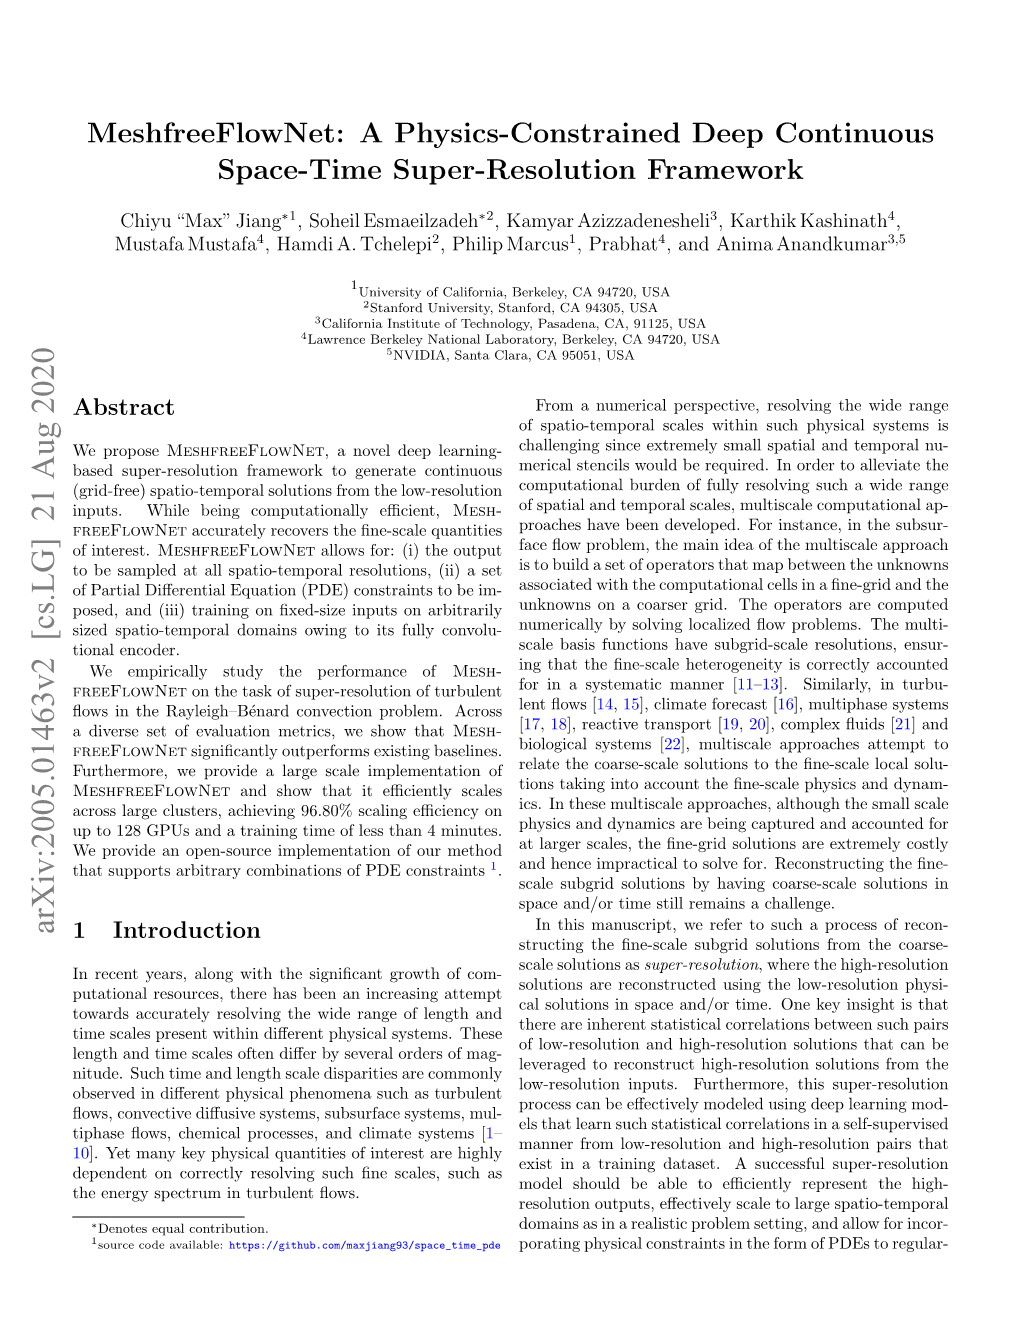 Meshfreeflownet: a Physics-Constrained Deep Continuous Space-Time Super-Resolution Framework